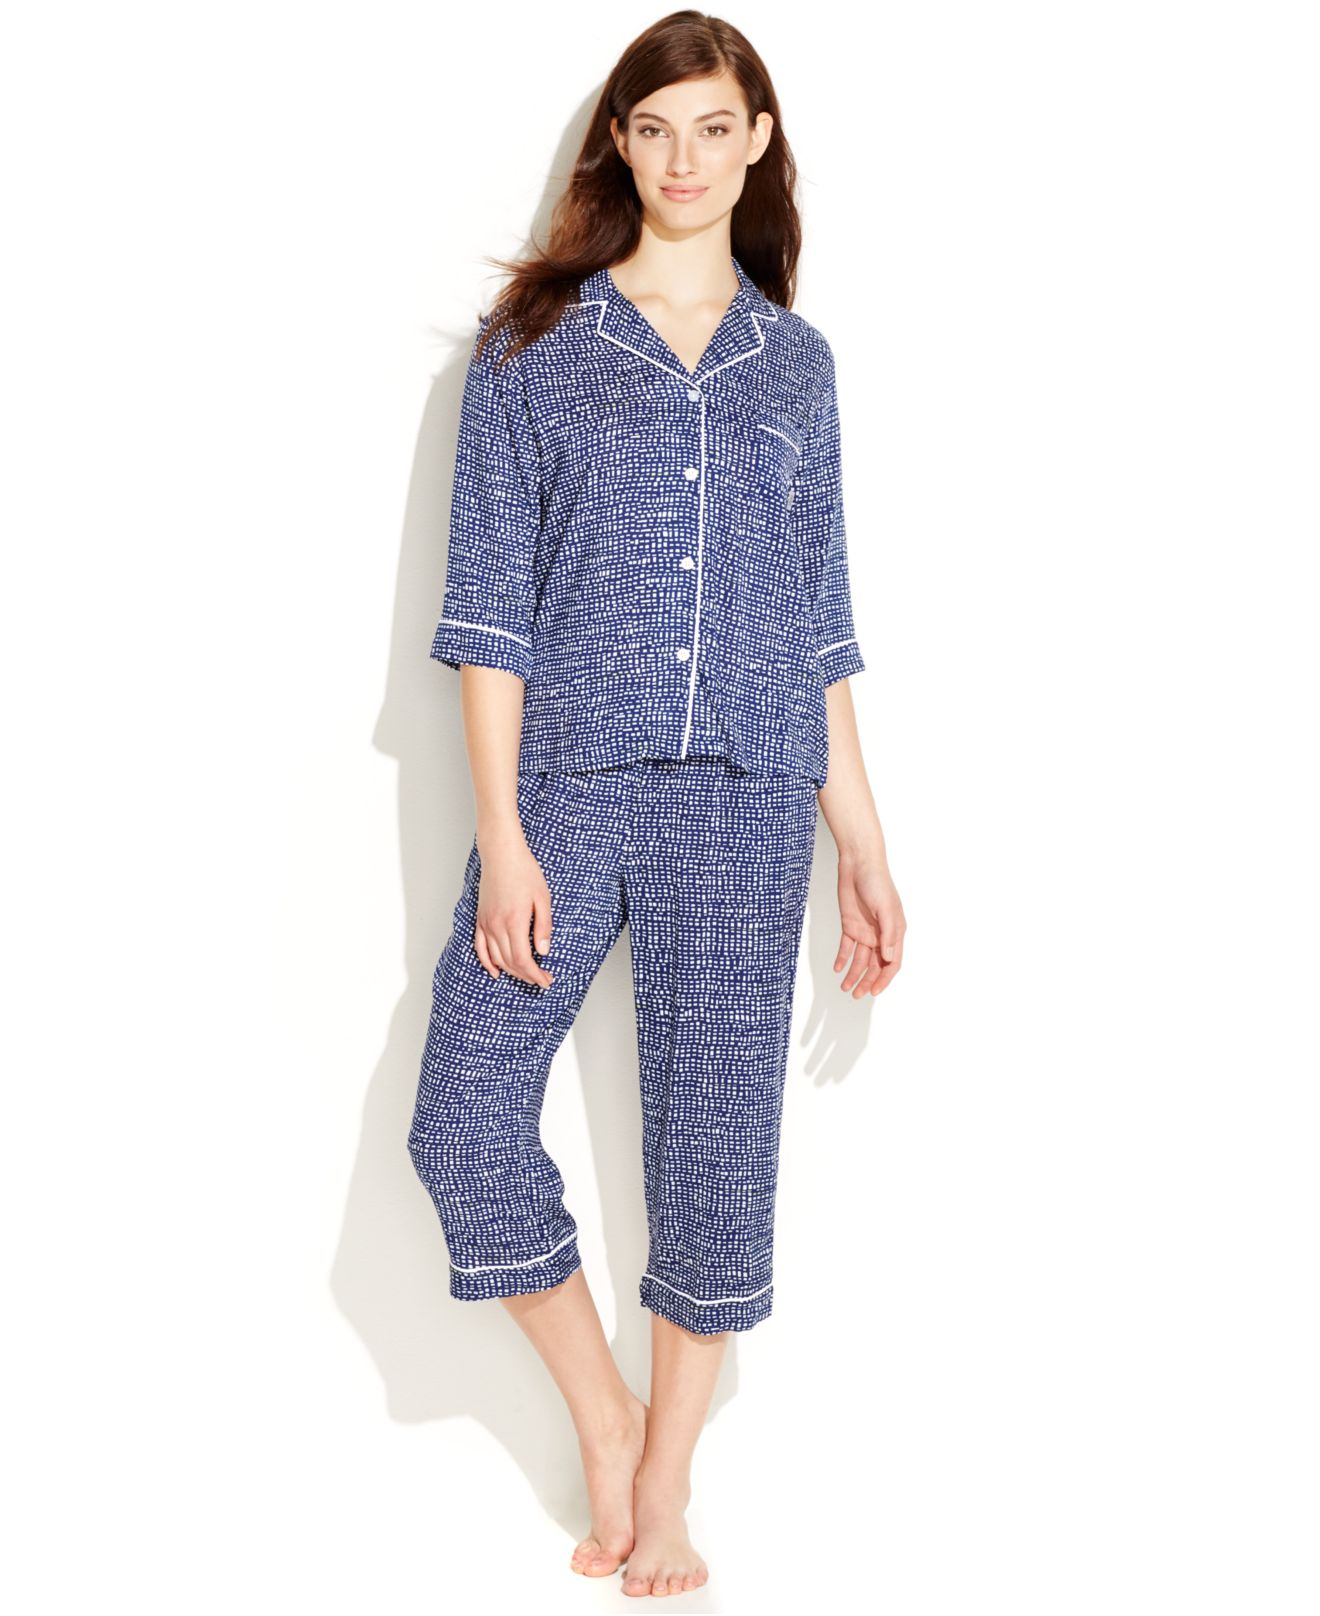 DKNY Notch Collar Top And Capri Pajama Pants Set in Blue - Lyst